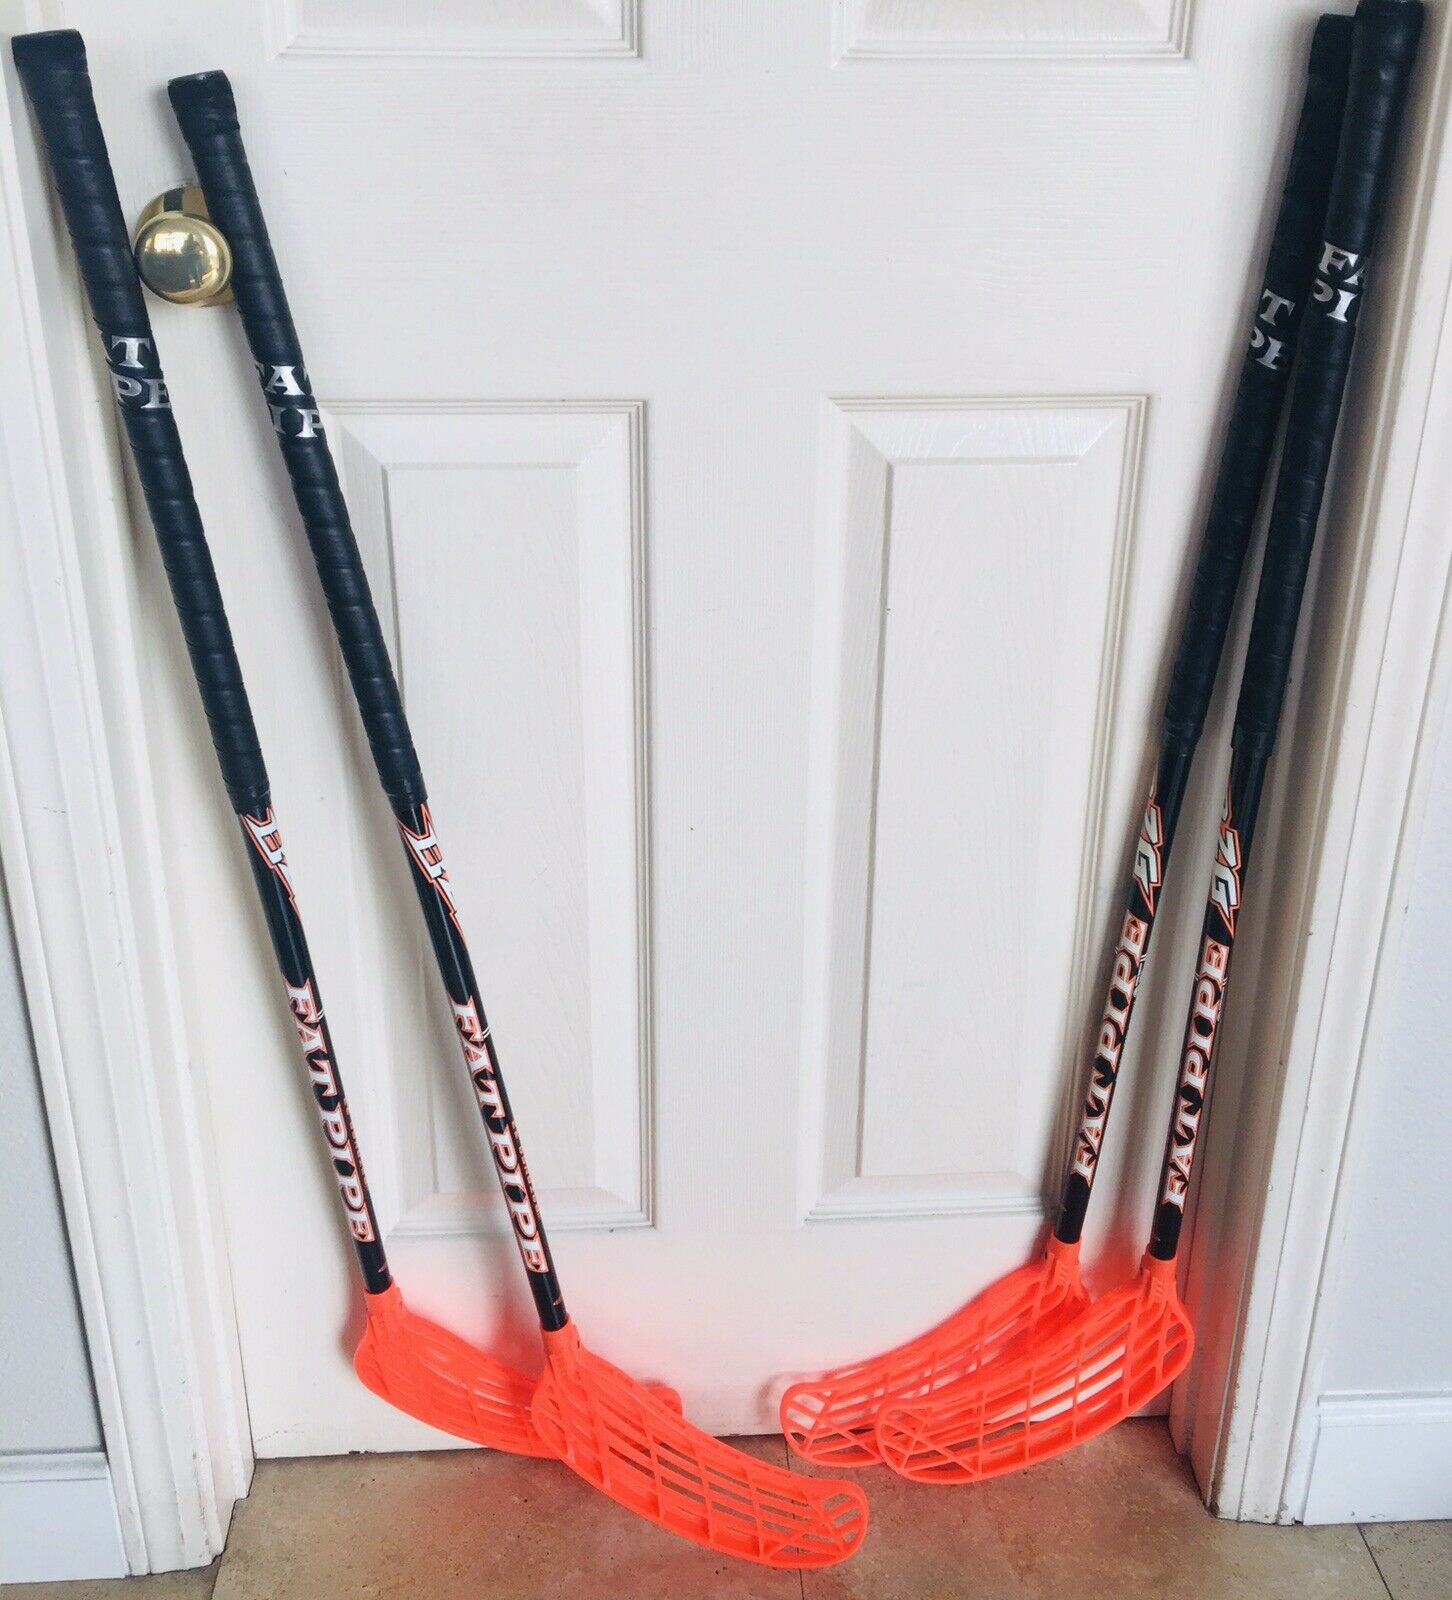 Fatpipe Bazanga 33 Junior Floorball Sticks - 4 With Canvas Bag Made In Finland